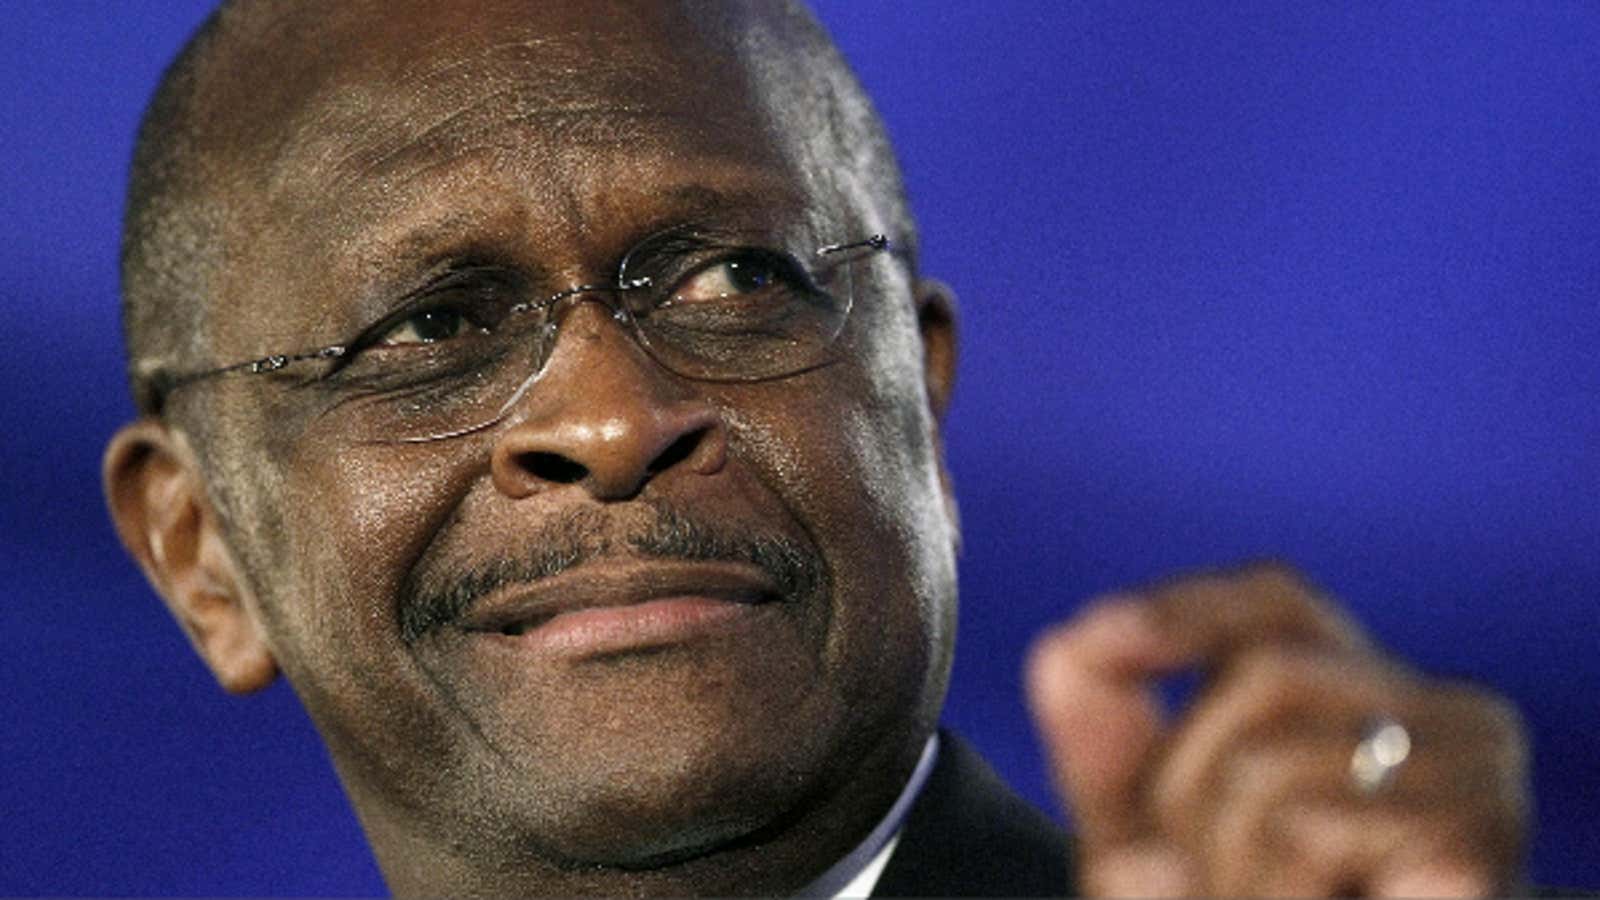 Herman Cain was one of the many colorful characters that added to the circus-like feel of the long election season.